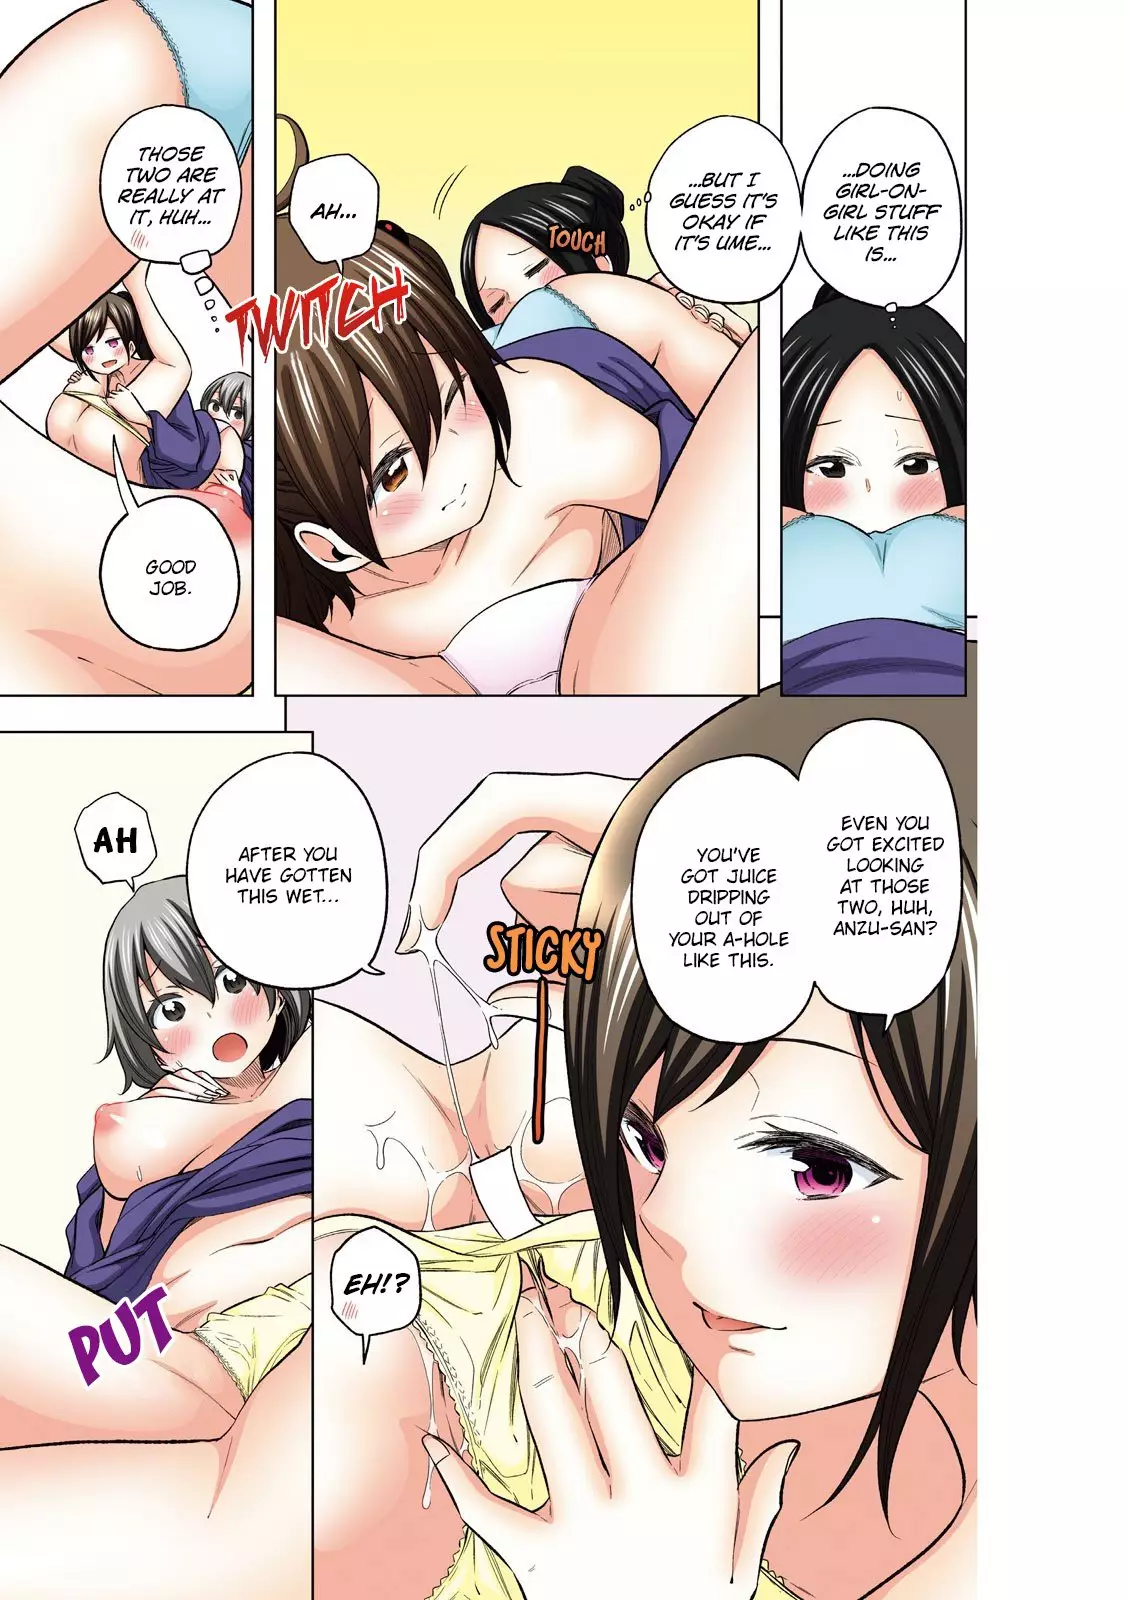 Why are you here Sensei!? - 98.5 page 6